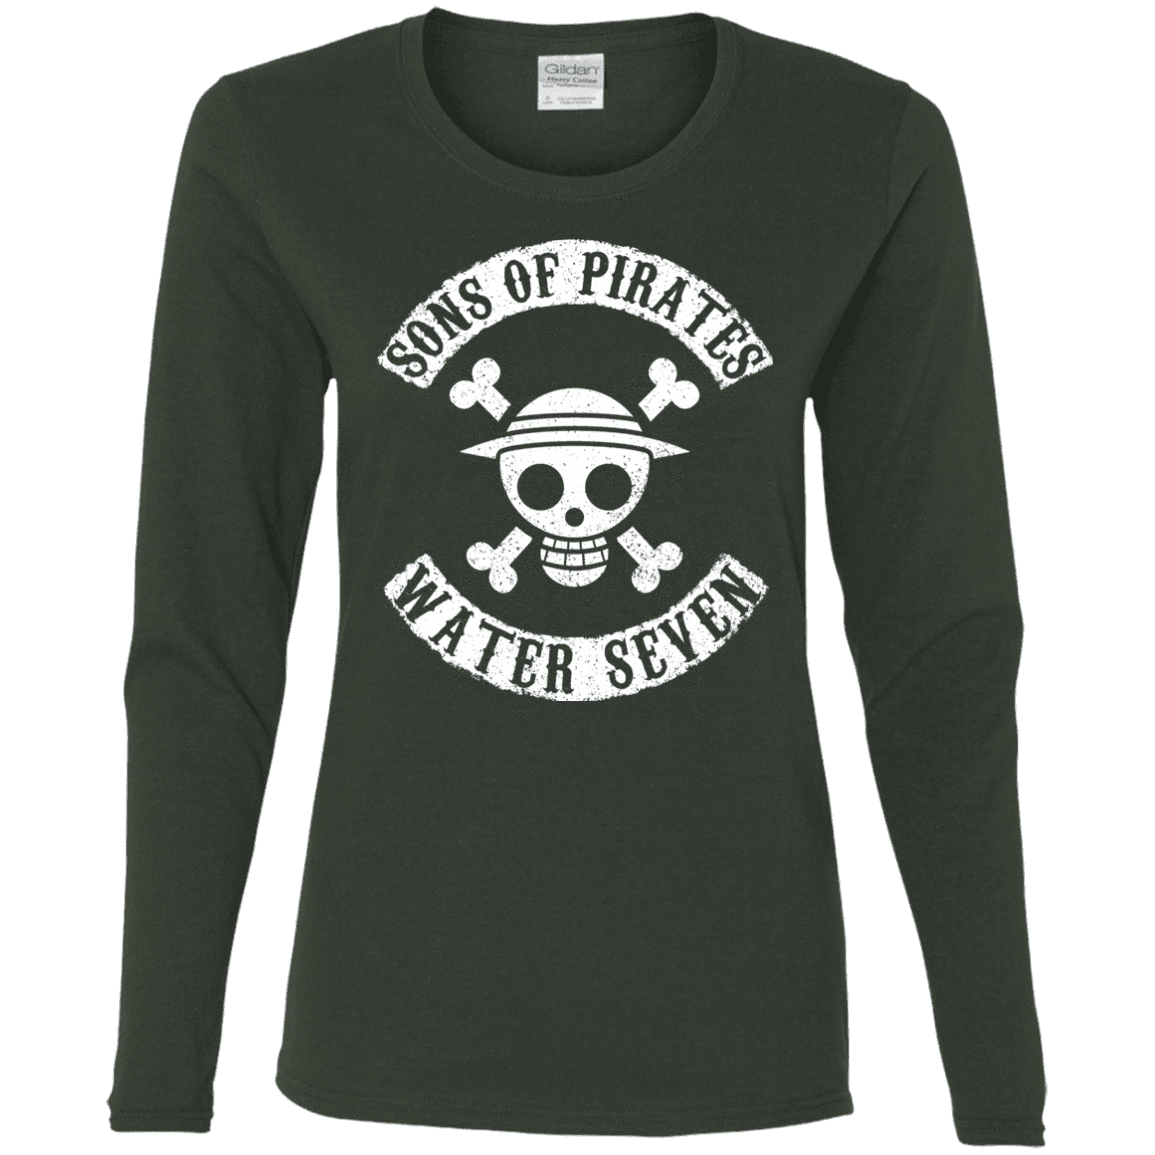 T-Shirts Forest / S Sons of Pirates Women's Long Sleeve T-Shirt